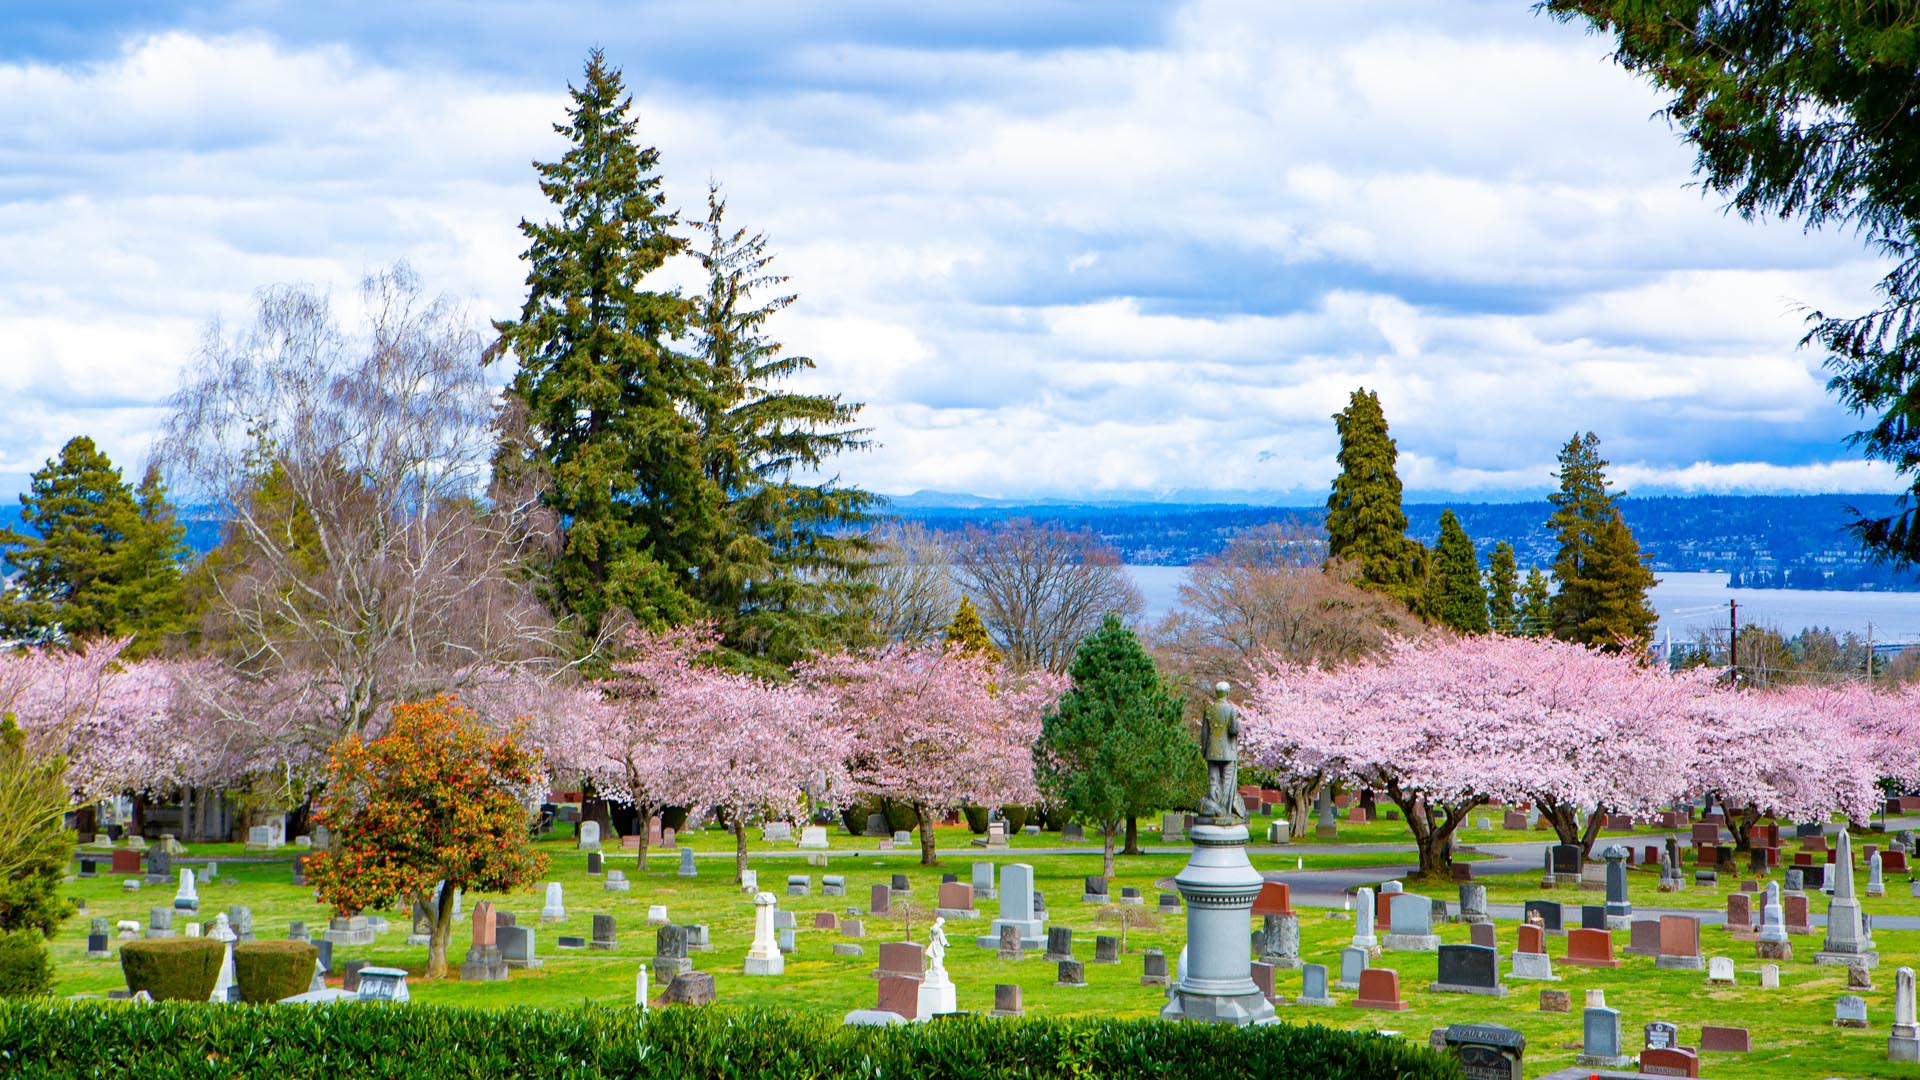 view over cemetery past flowering plum trees and to the lake